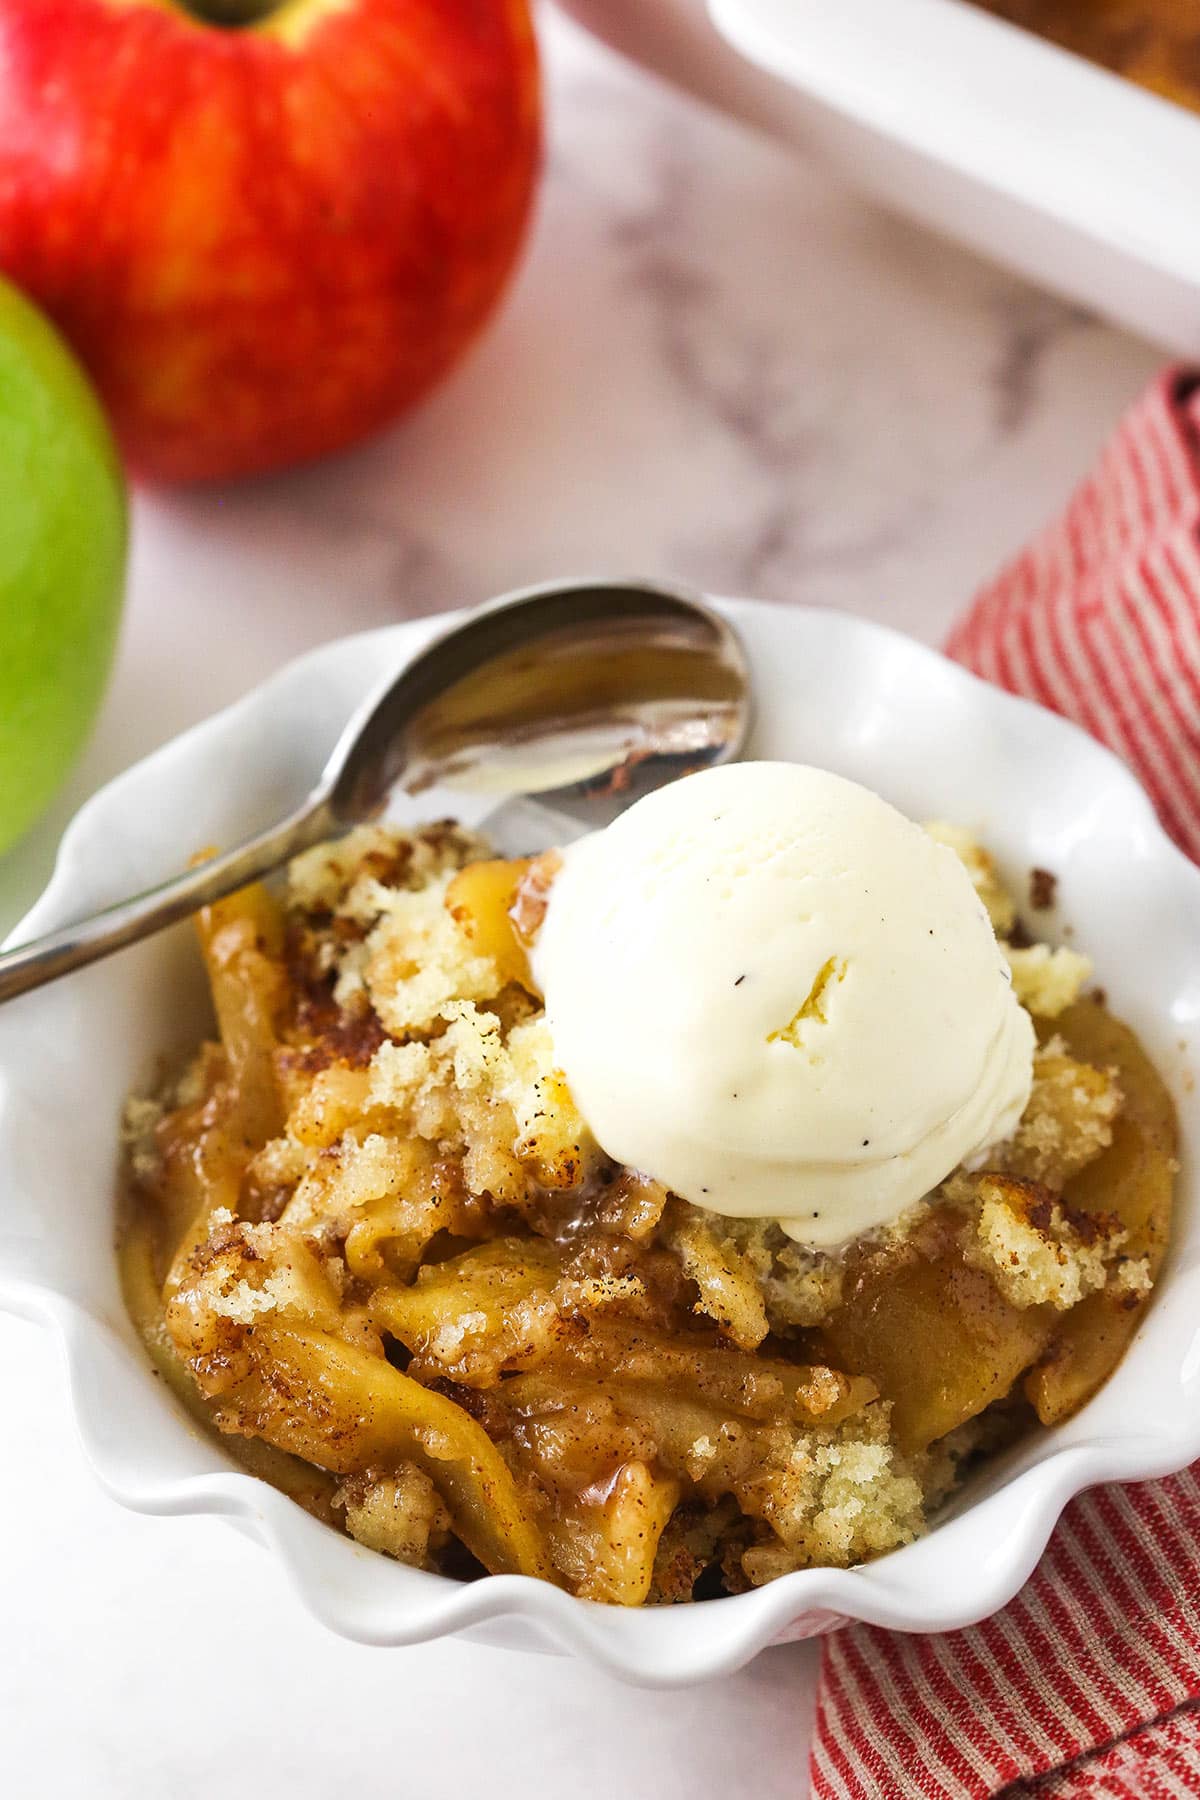 A serving of apple cobbler in a bowl with a spoon and a small scoop of ice cream